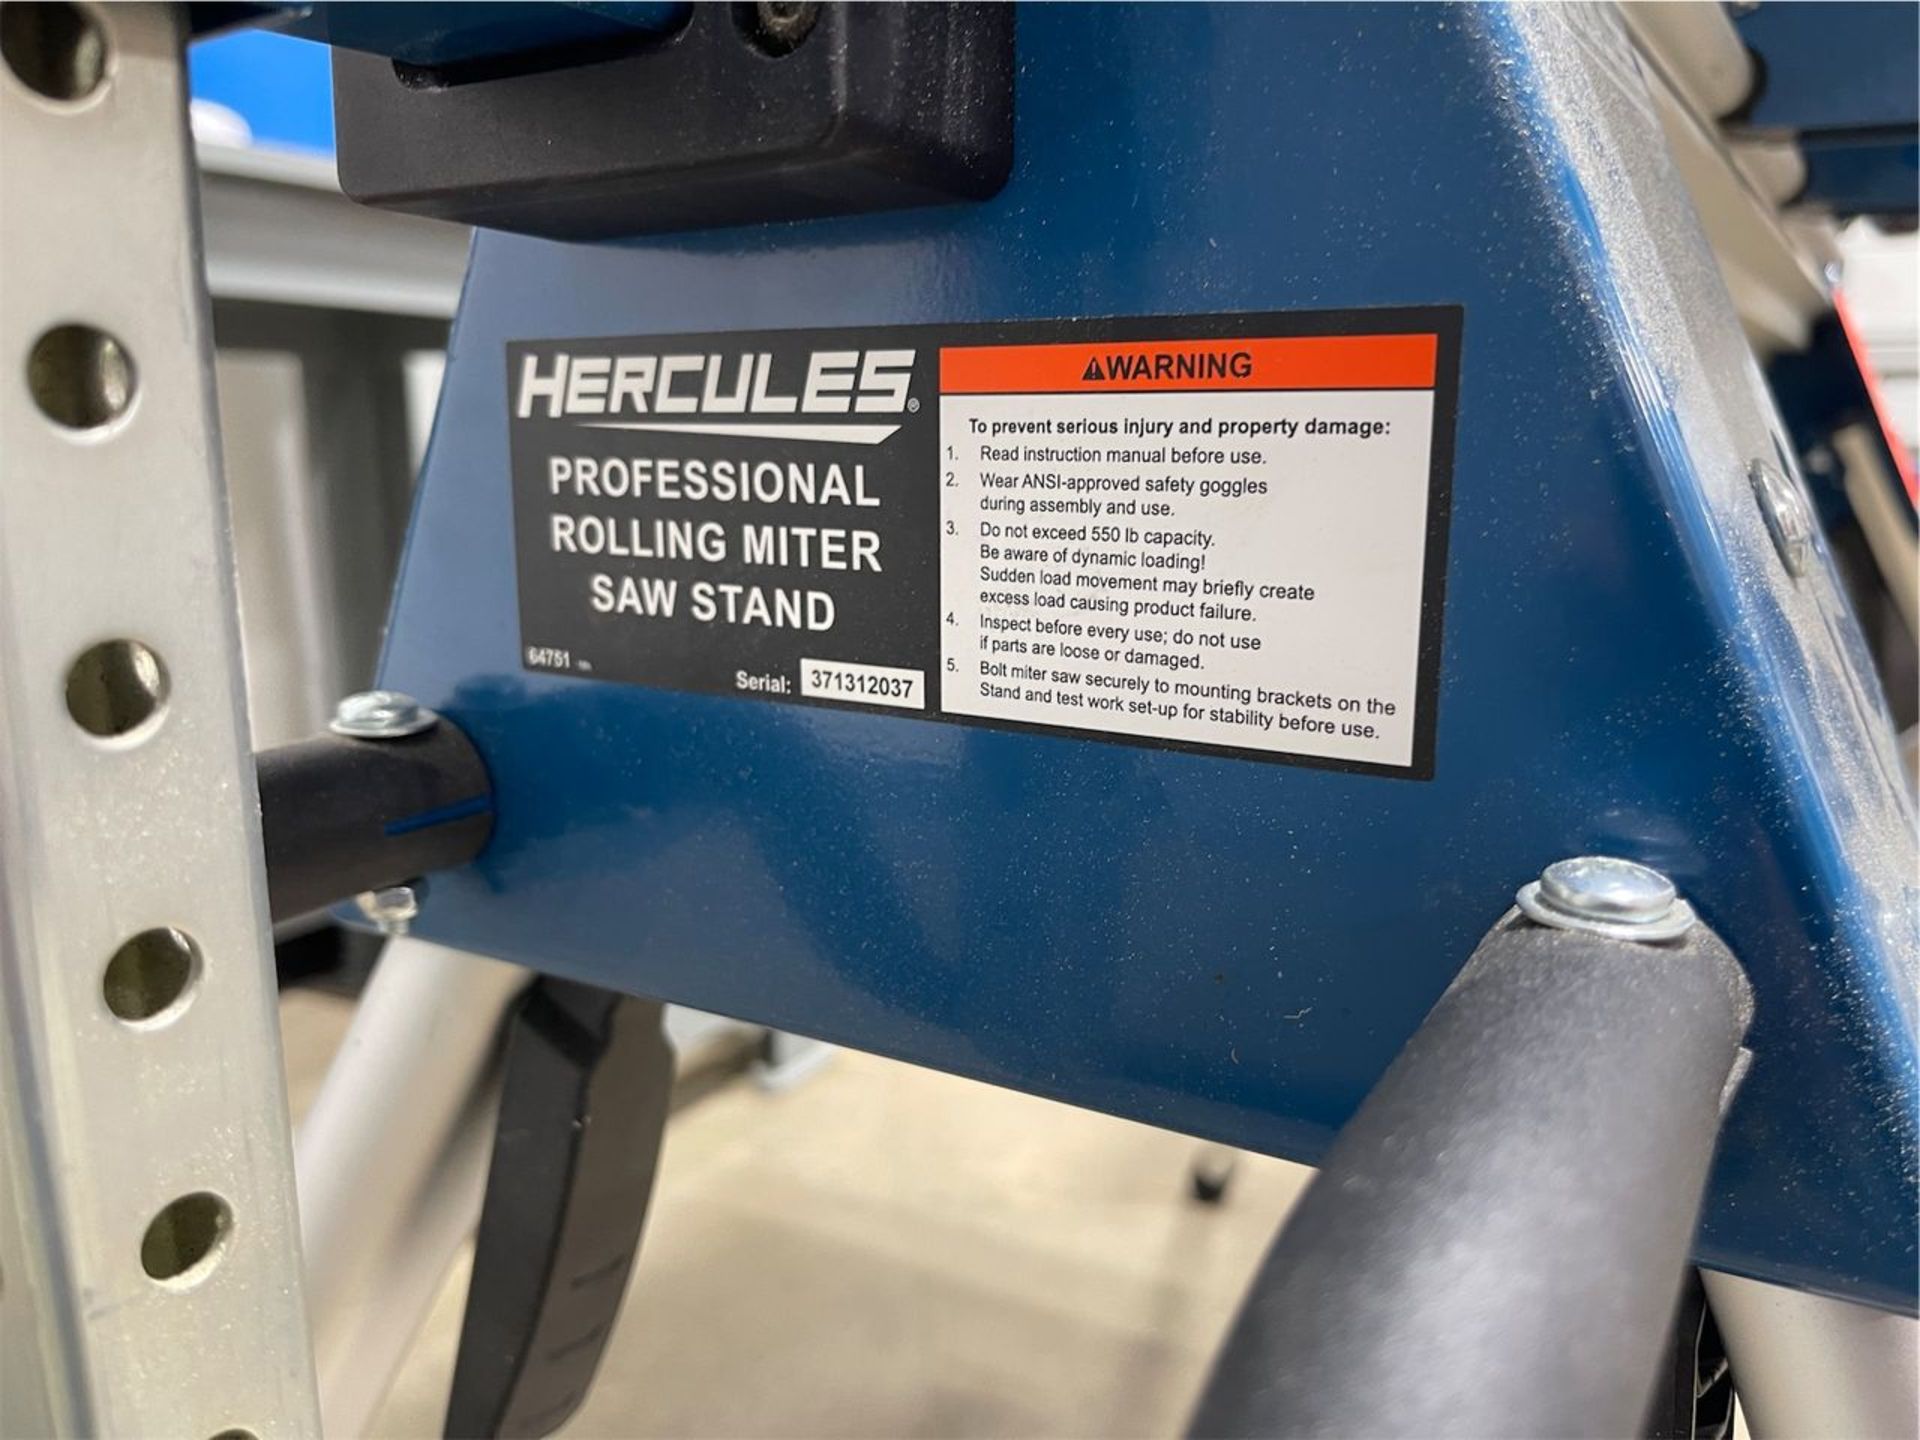 Hercules 10 in. Compact Jobsite Table Saw, 5/8 in. Arbor, on Hercules Mobile Folding Stand - Image 7 of 7